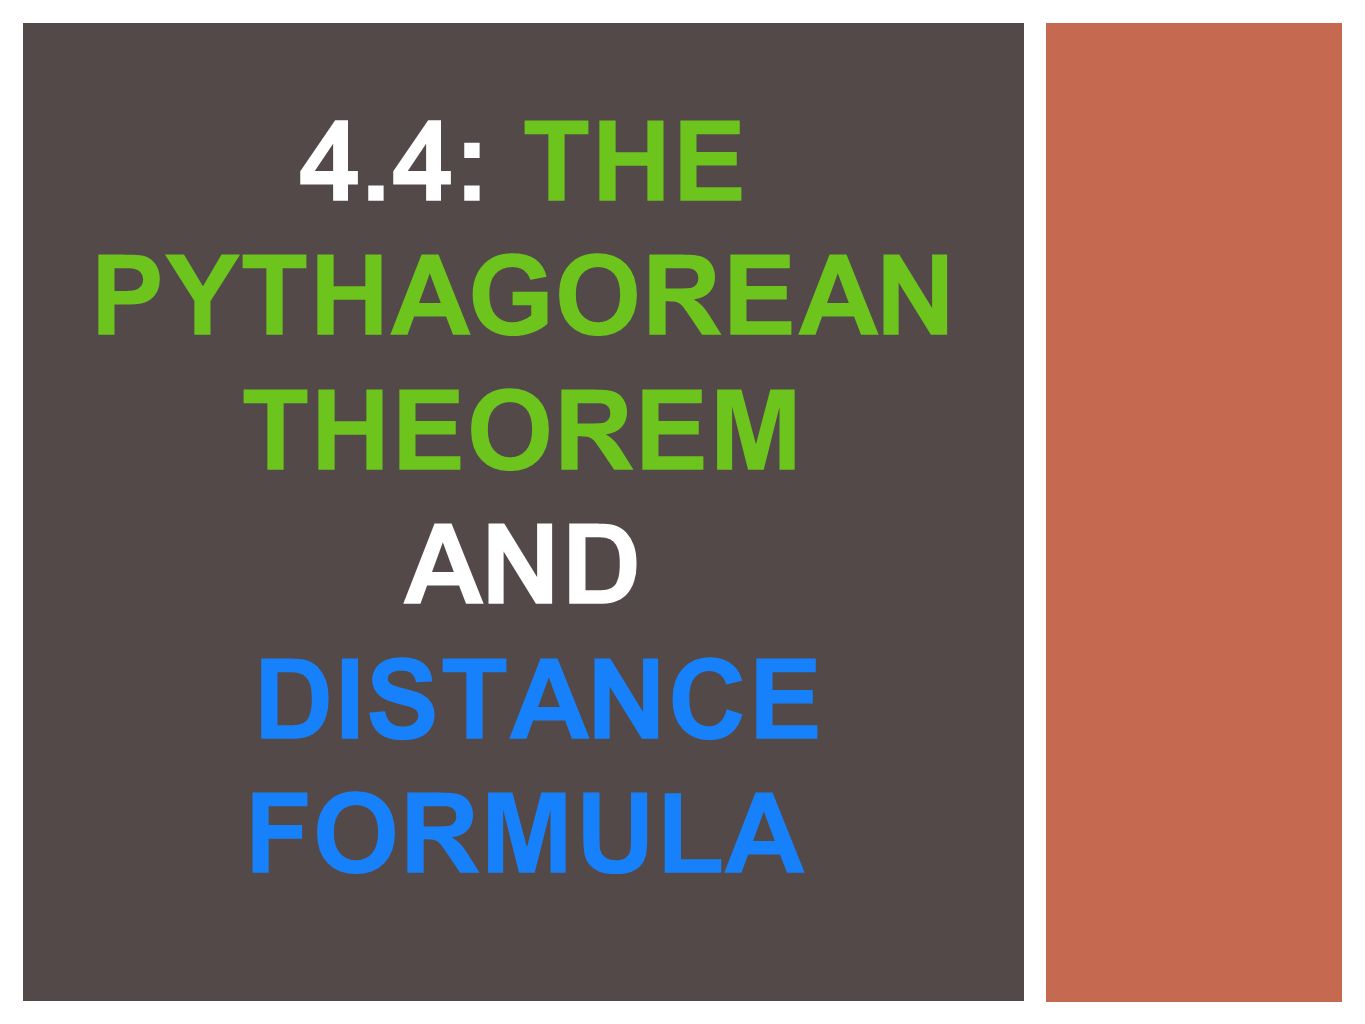 4.4: THE PYTHAGOREAN THEOREM AND DISTANCE FORMULA